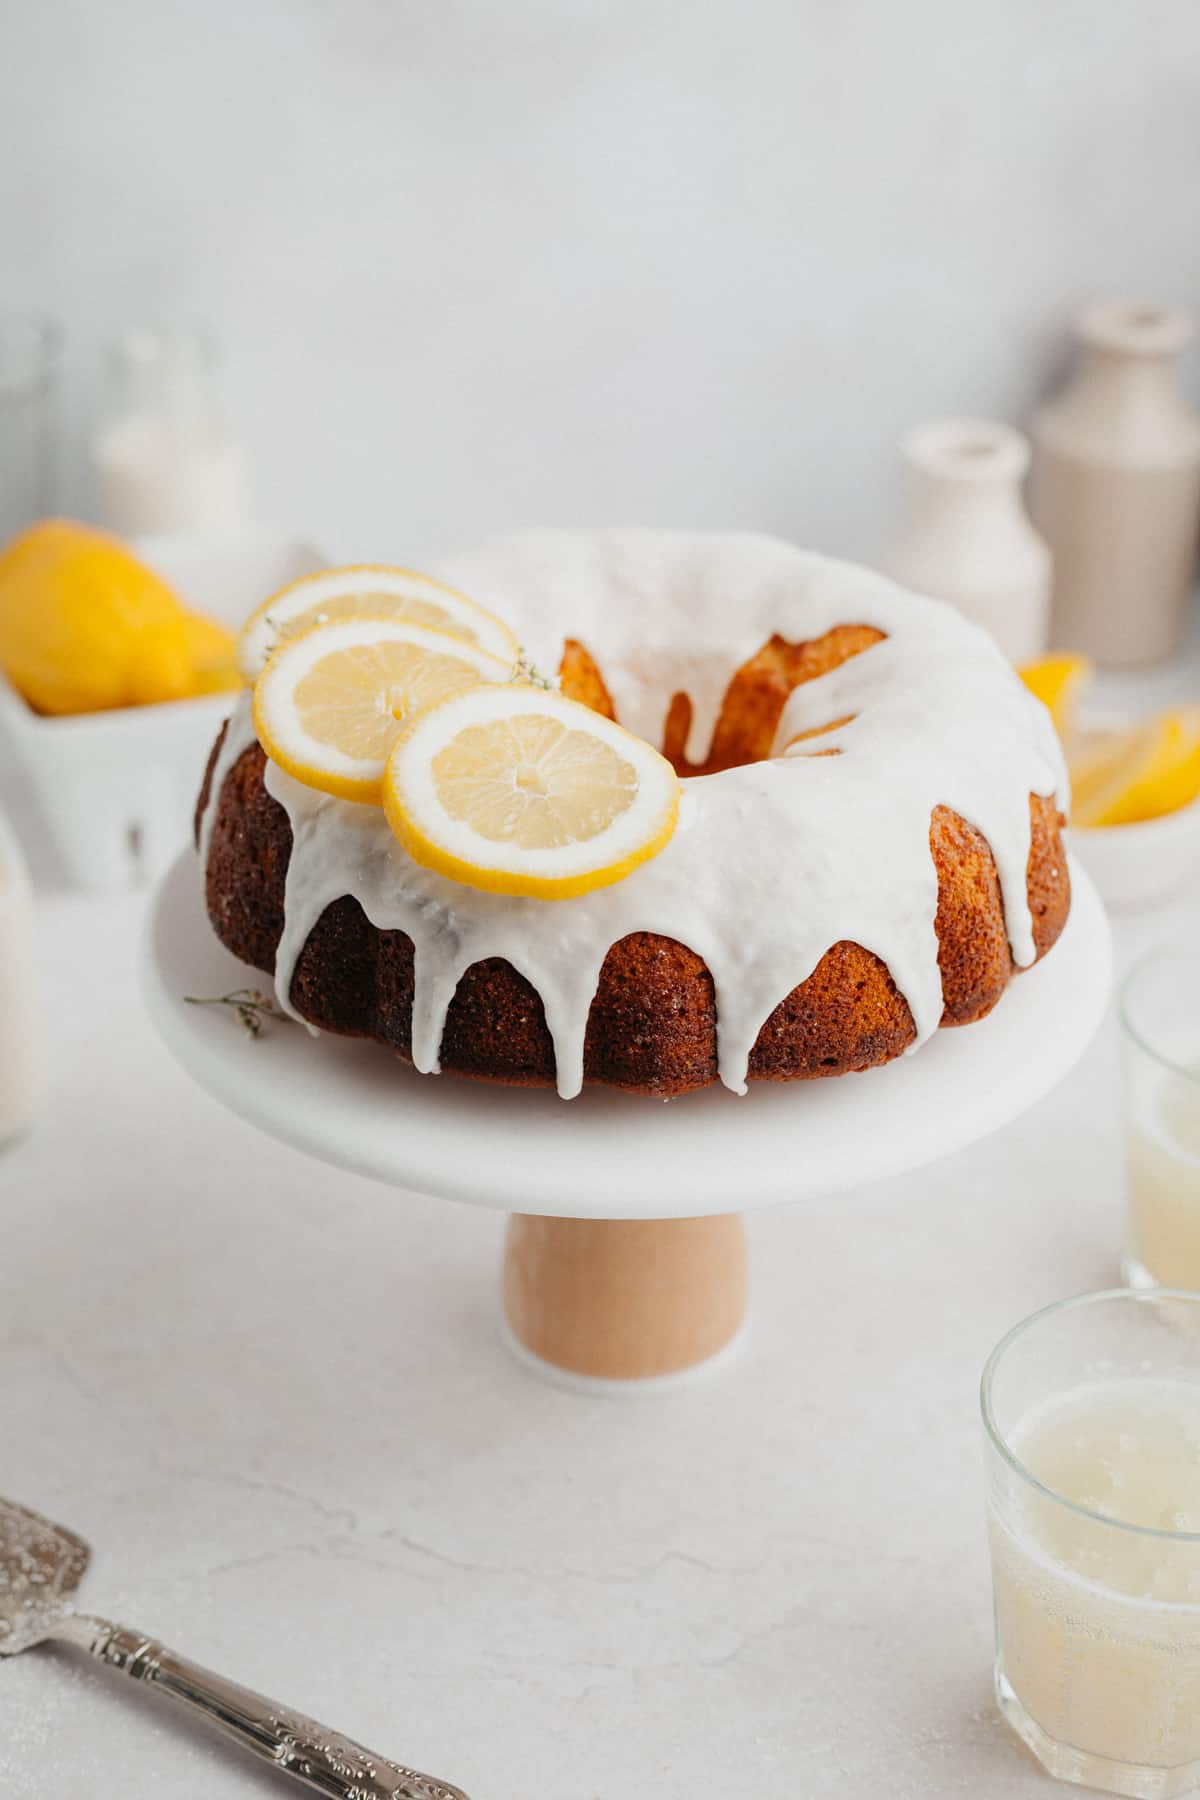 A lemon bundt cake covered in a white glaze and slices of lemon on a white cake stand.